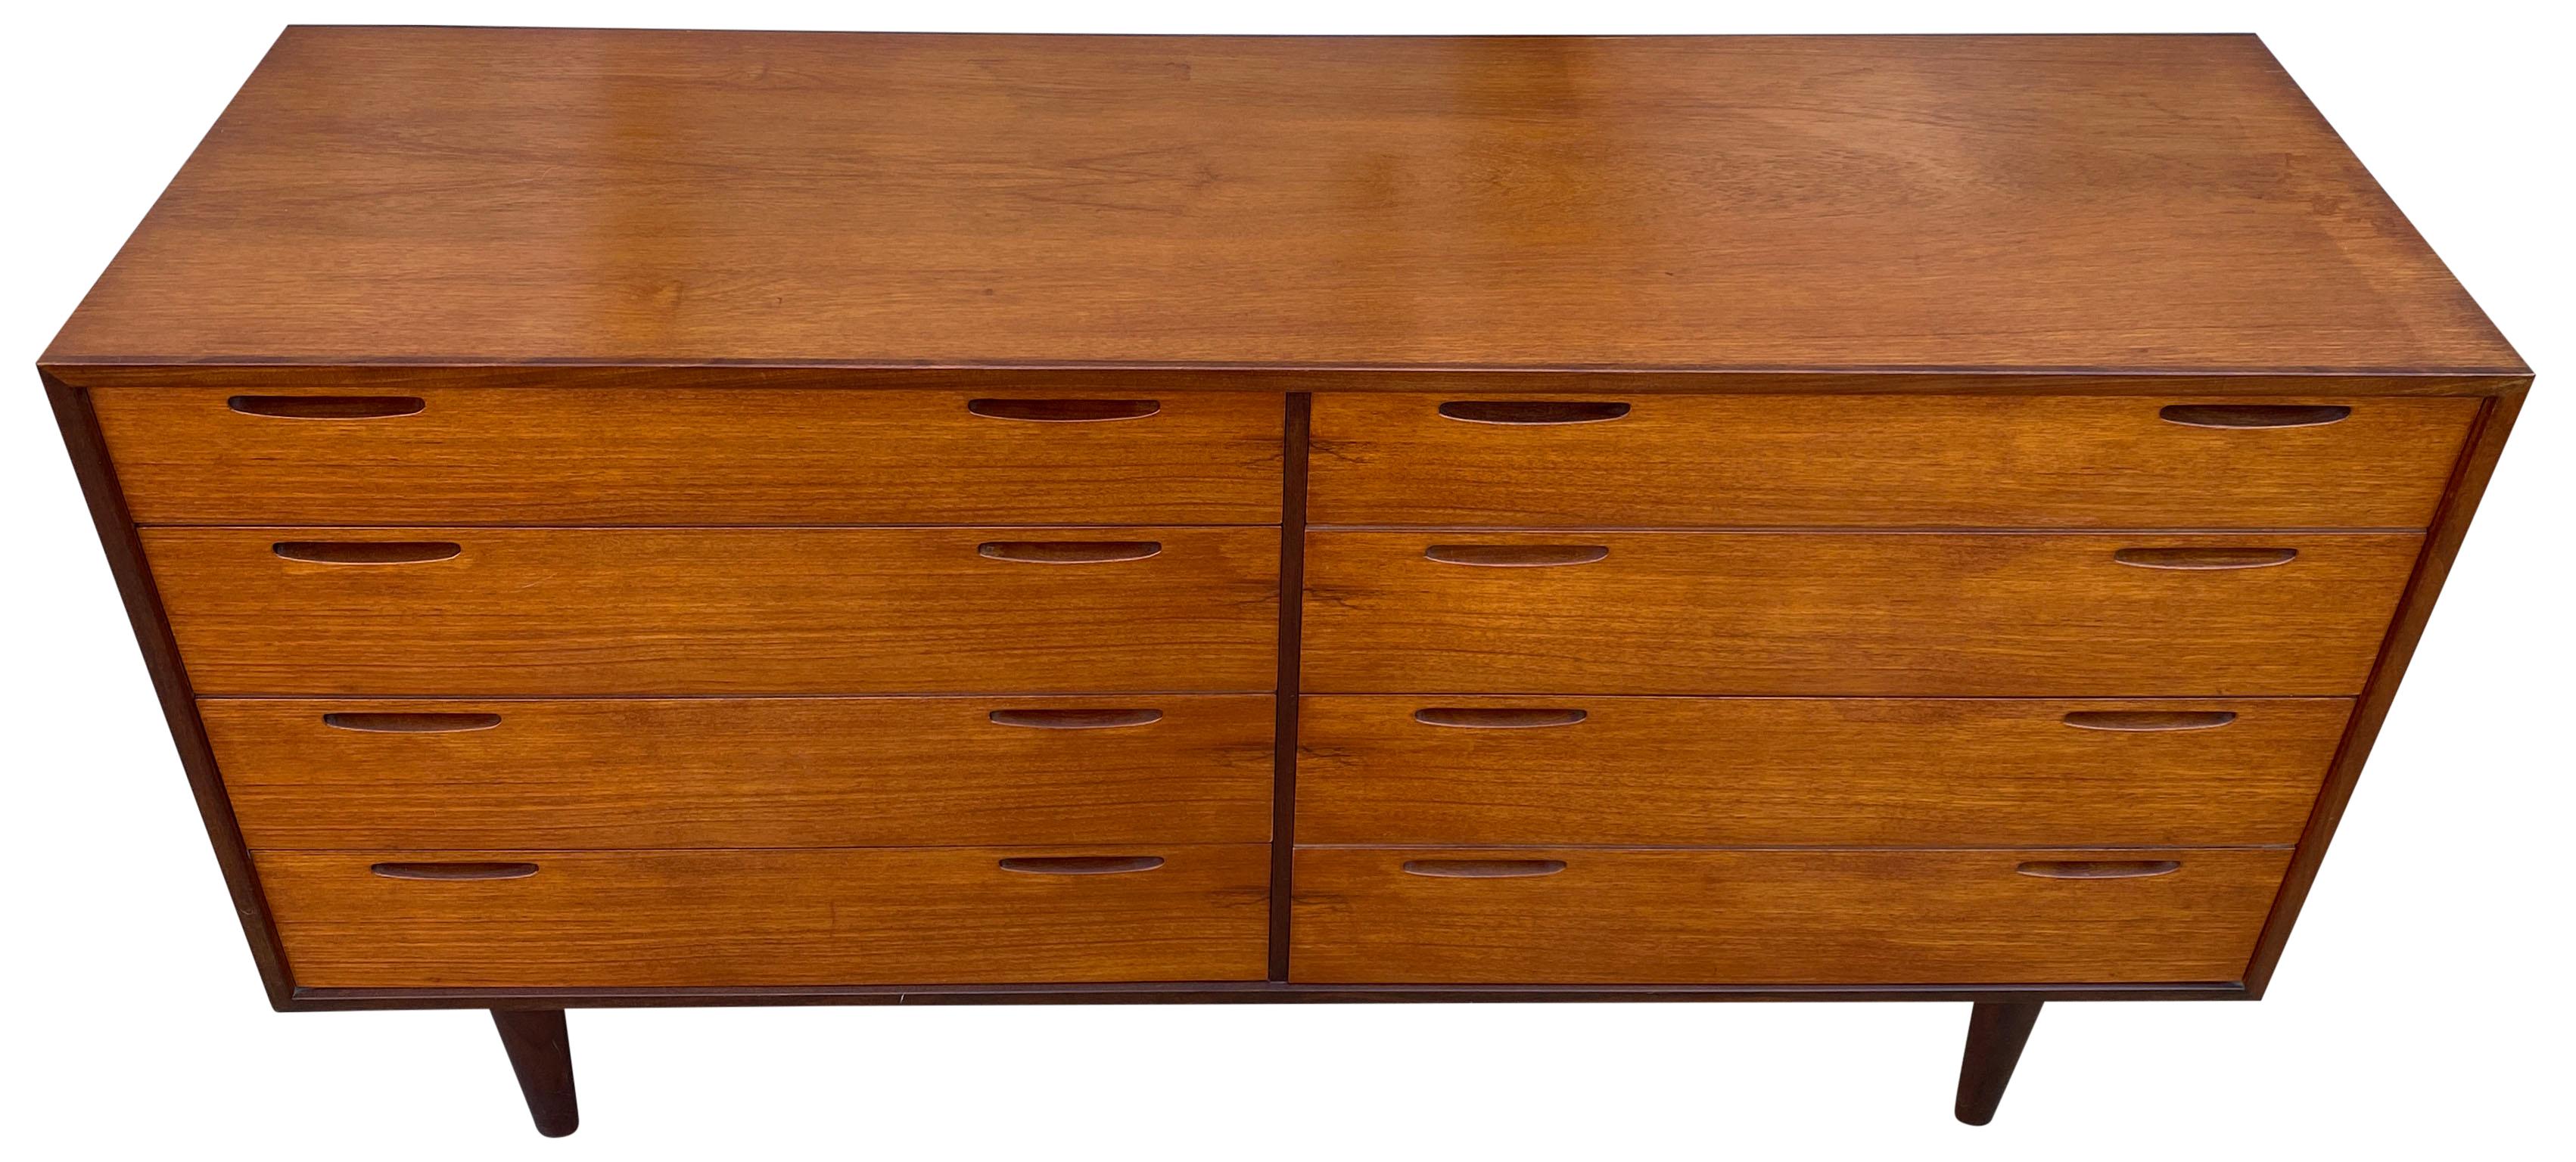 Beautiful 8-drawer dresser credenza designed by Ib Kofod-Larsen and manufactured by J. Clausen Brande Møbelfabrik, Denmark, 1960. Very high quality Scandinavian design, superb finished all around and even the teak wooden back. Nice details are the